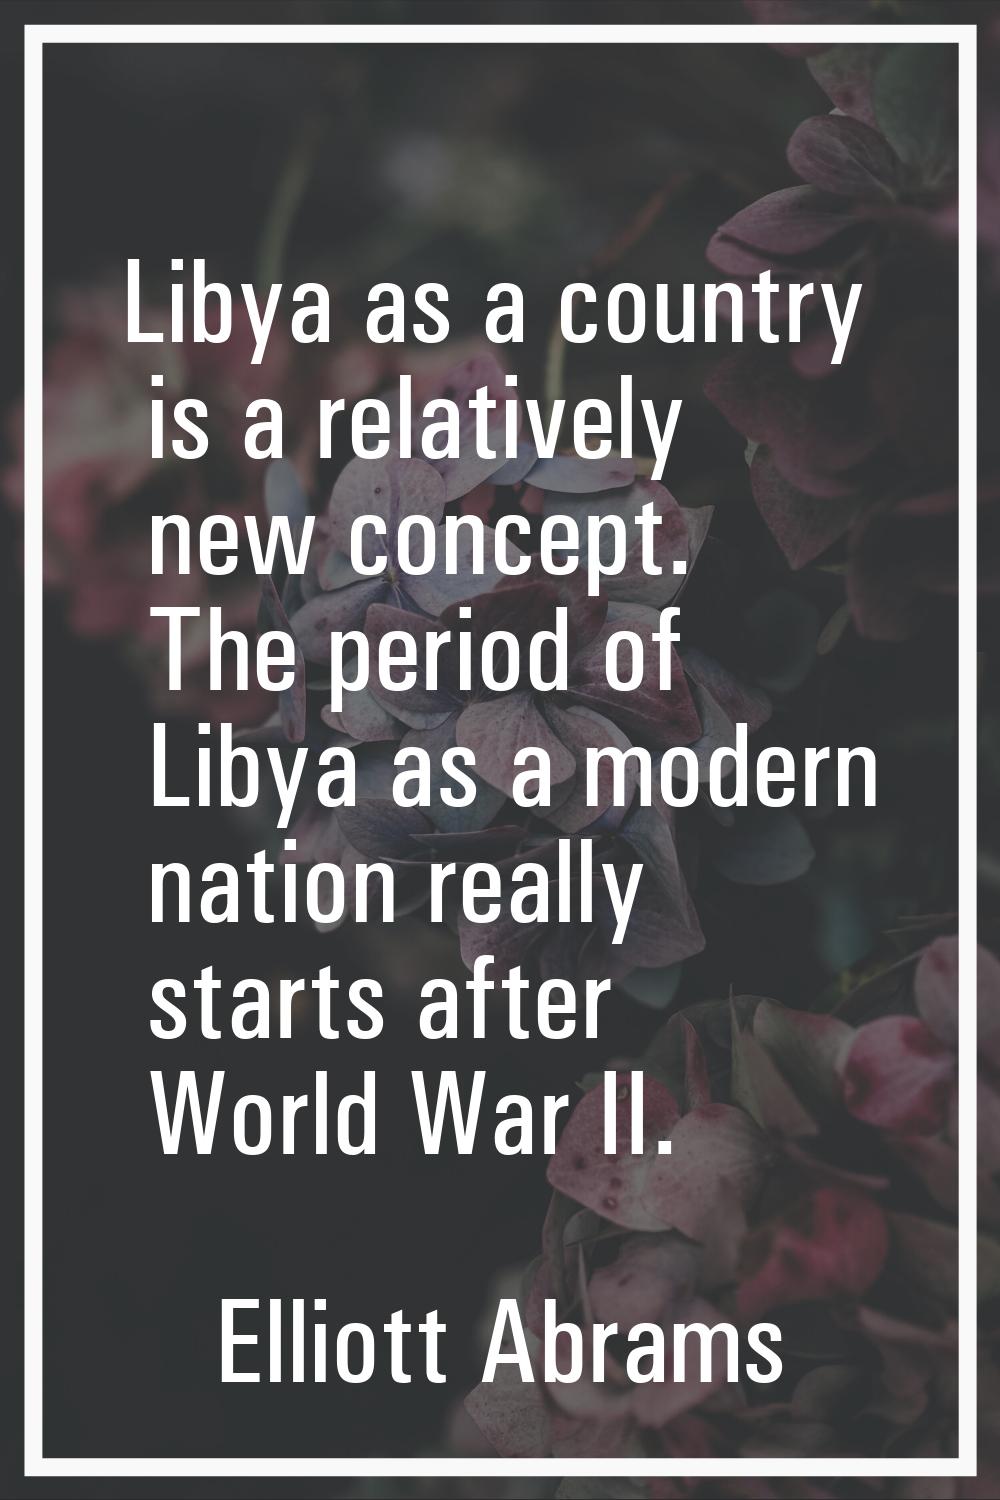 Libya as a country is a relatively new concept. The period of Libya as a modern nation really start